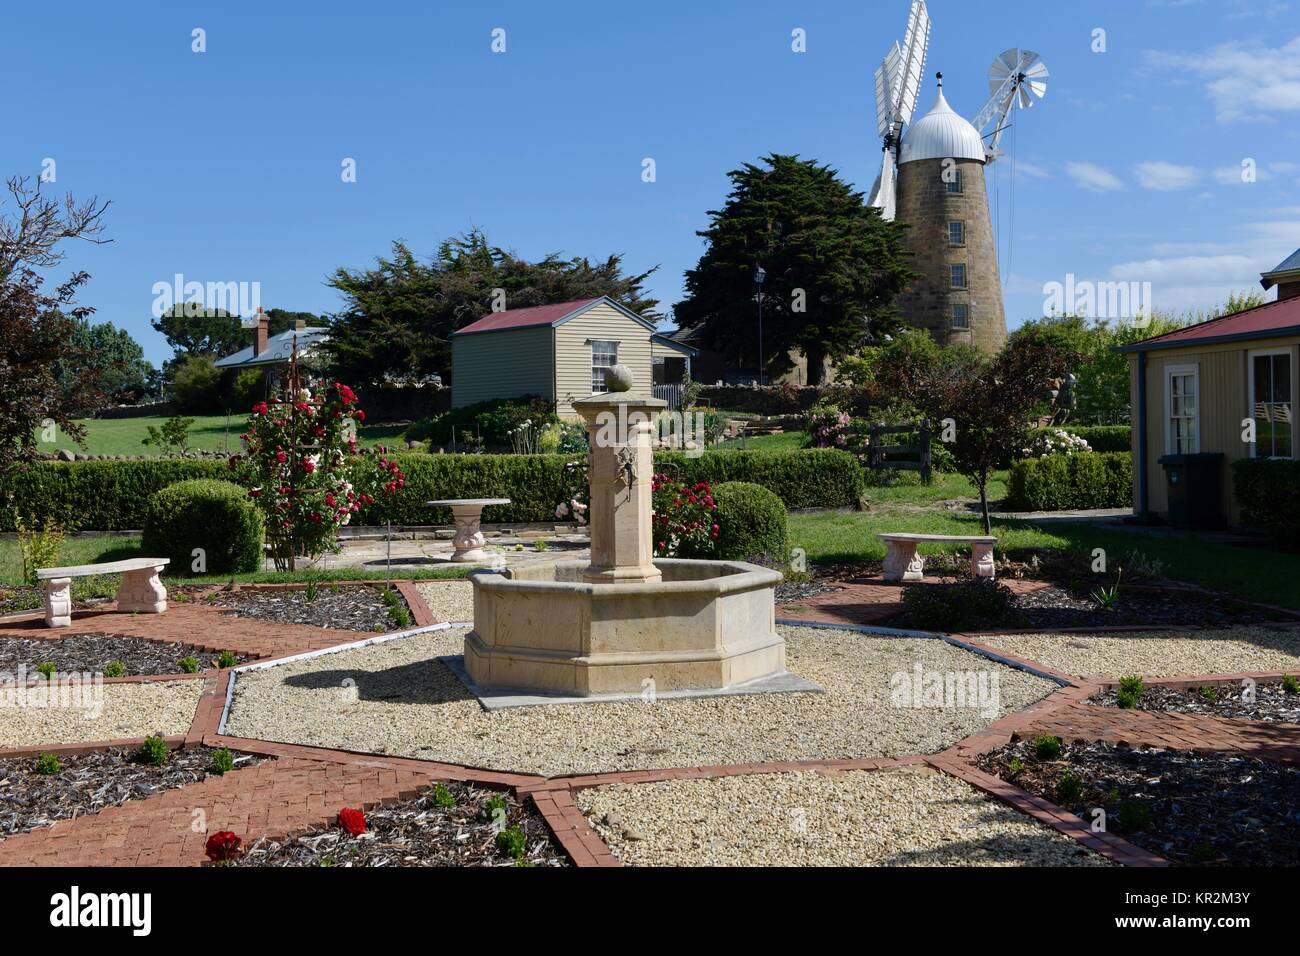 Traditional Australian homes with gardens in Tasmania, Australia. The beautiful restored Callington mill stands in the background. Stock Photo